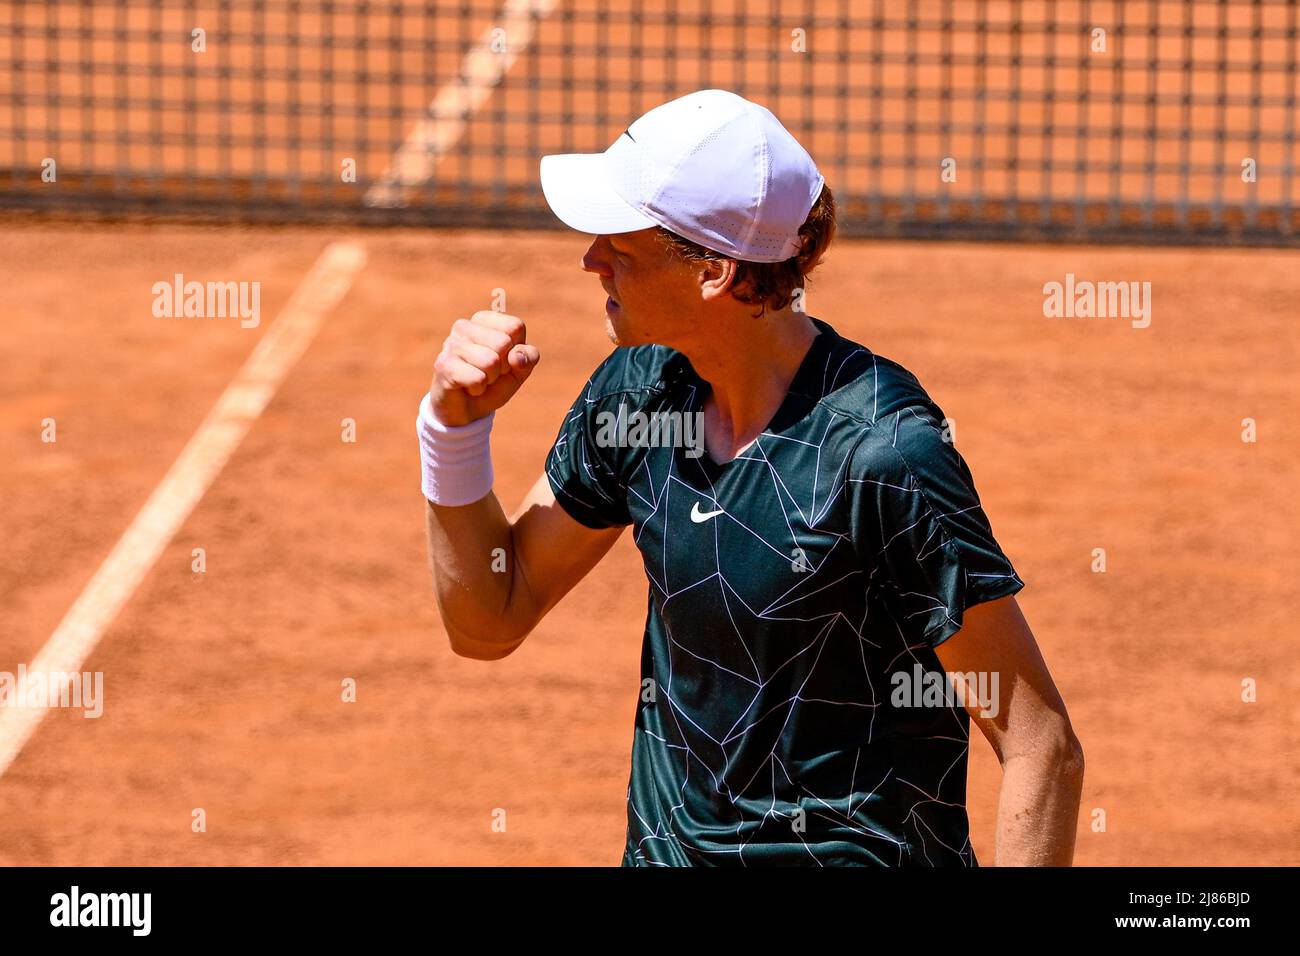 Rome, Italy. 13th May, 2022. May 13, 2022, Rome, Italy: Jannik Sinner (ITA)  during the quarter finals against Stefanos Tsitsipas (GRE) of the ATP  Master 1000 Internazionali BNL D'Italia tournament at Foro